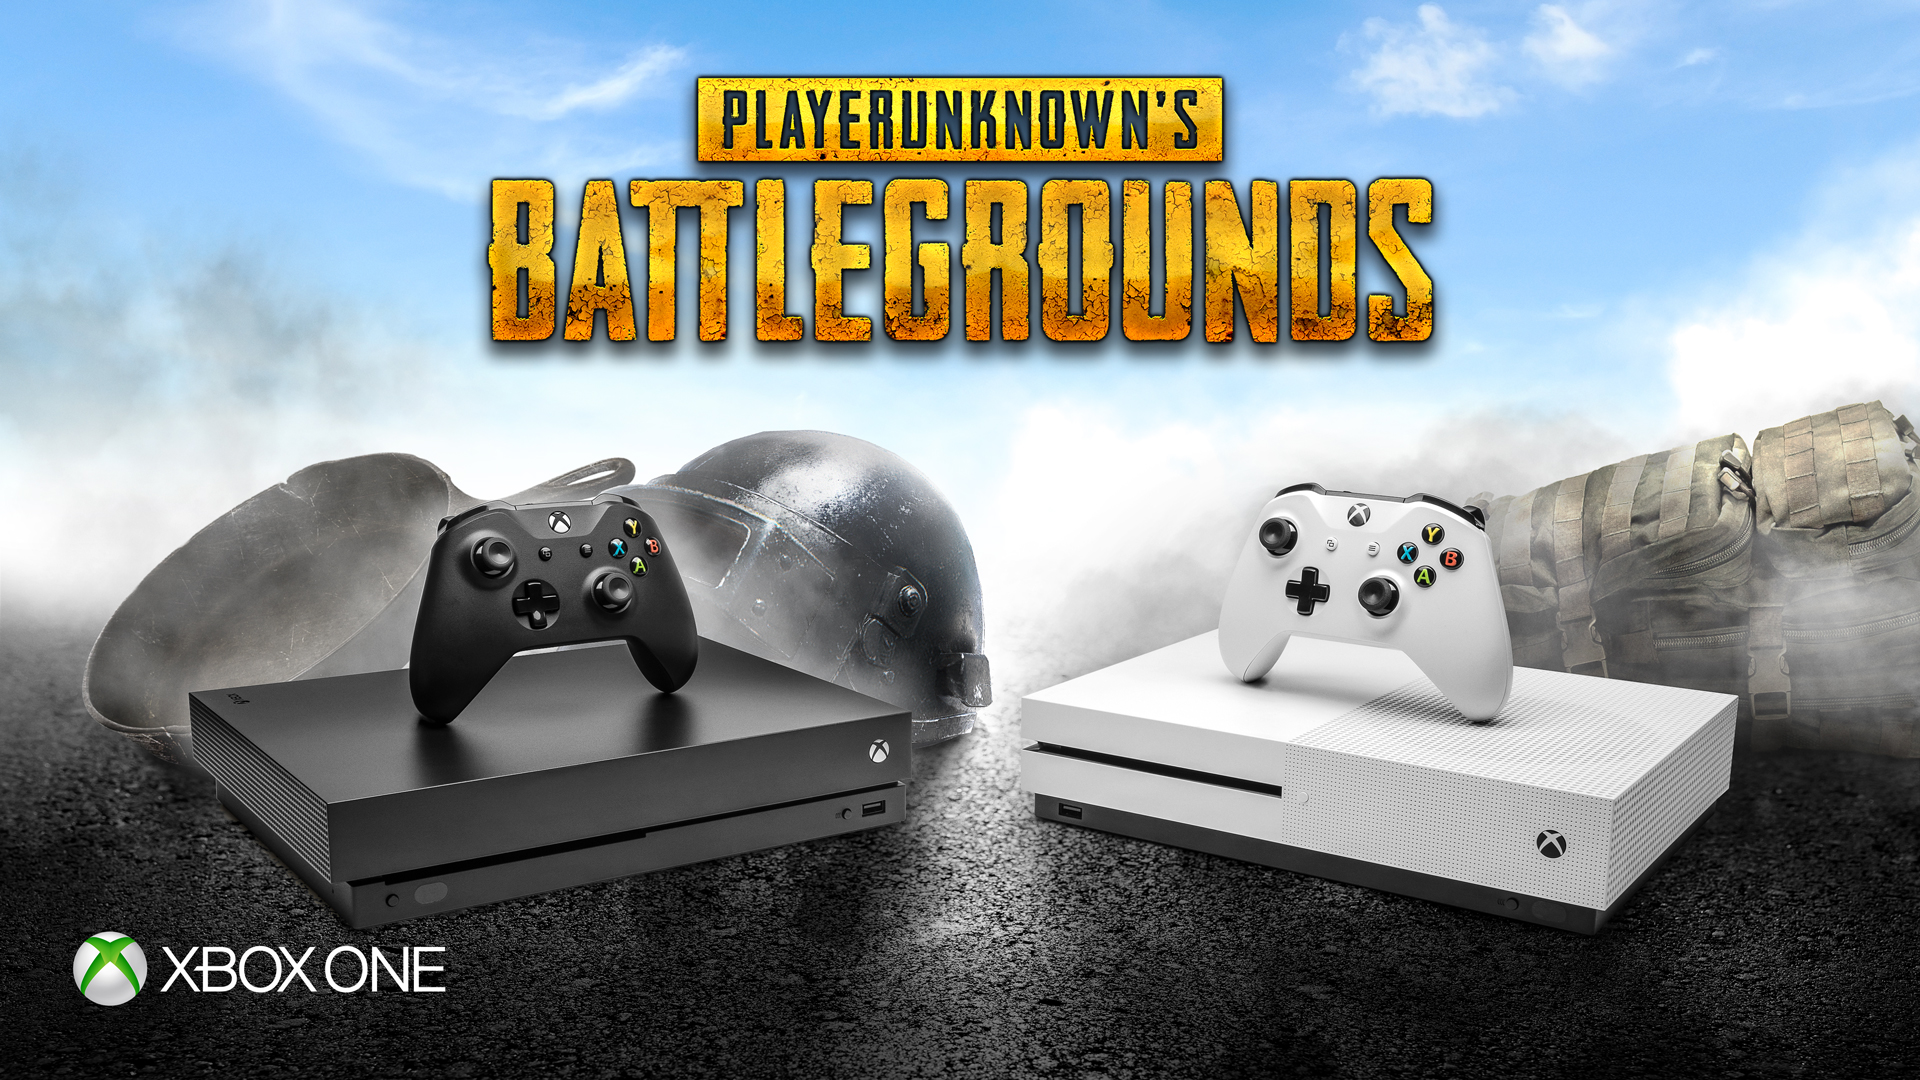 pubg for xbox one s